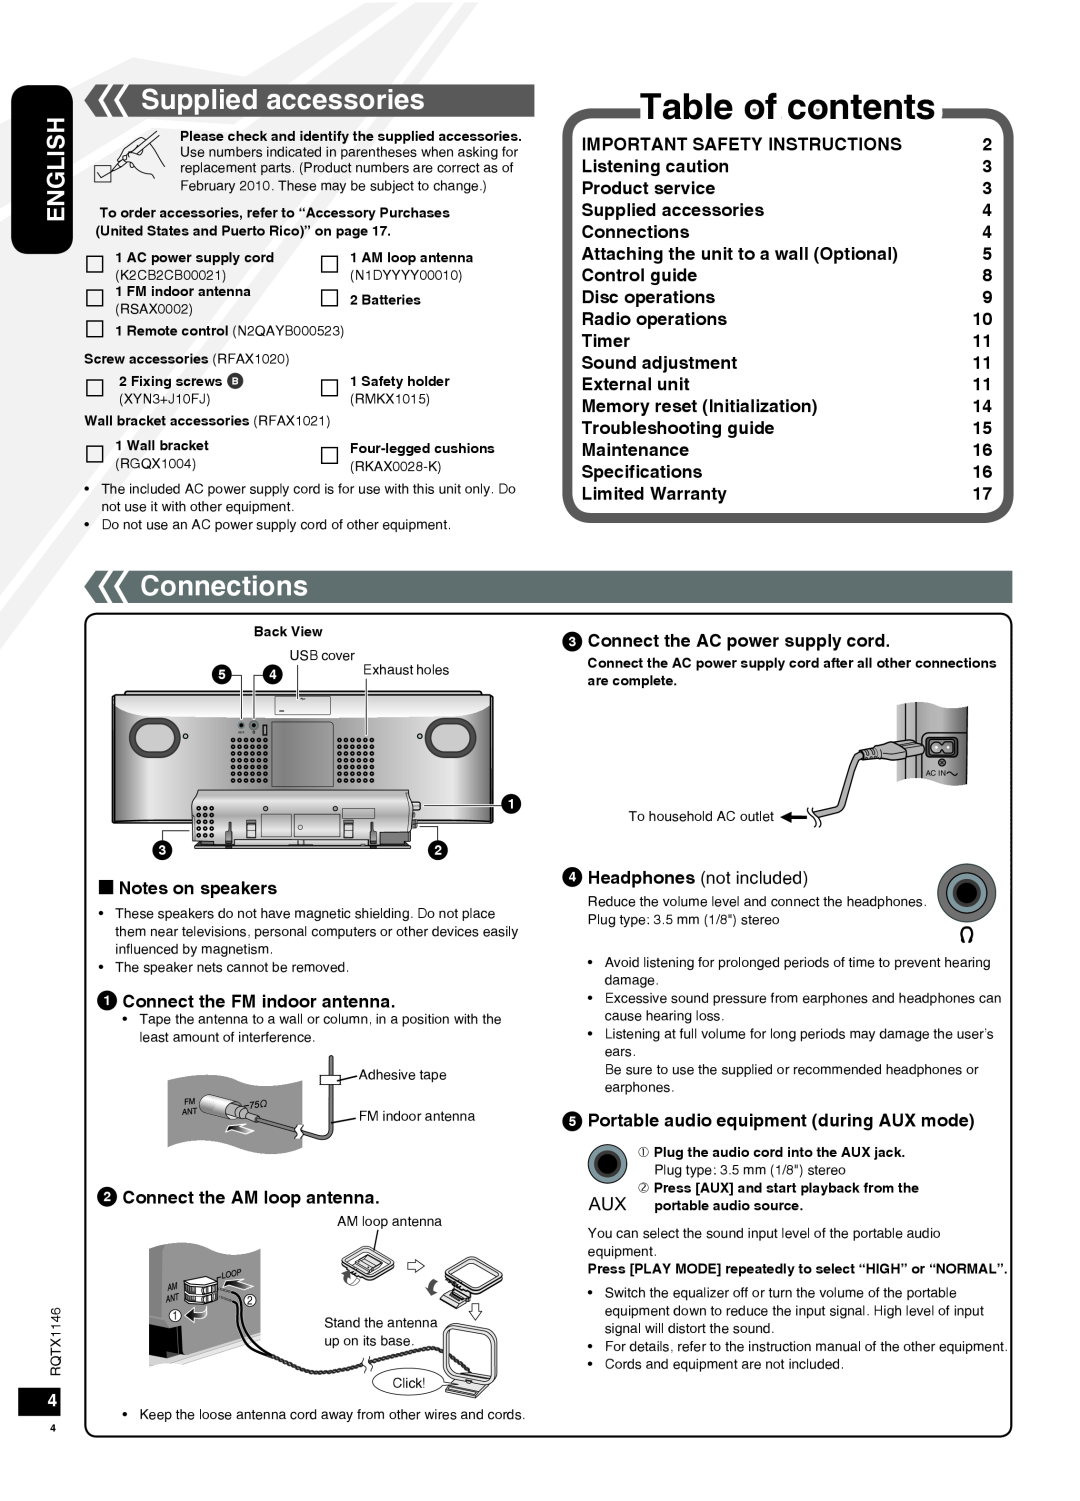 Panasonic SC-HC40 Table of contents, Supplied accessories, Connections, Important Safety Instructions, Listening caution 